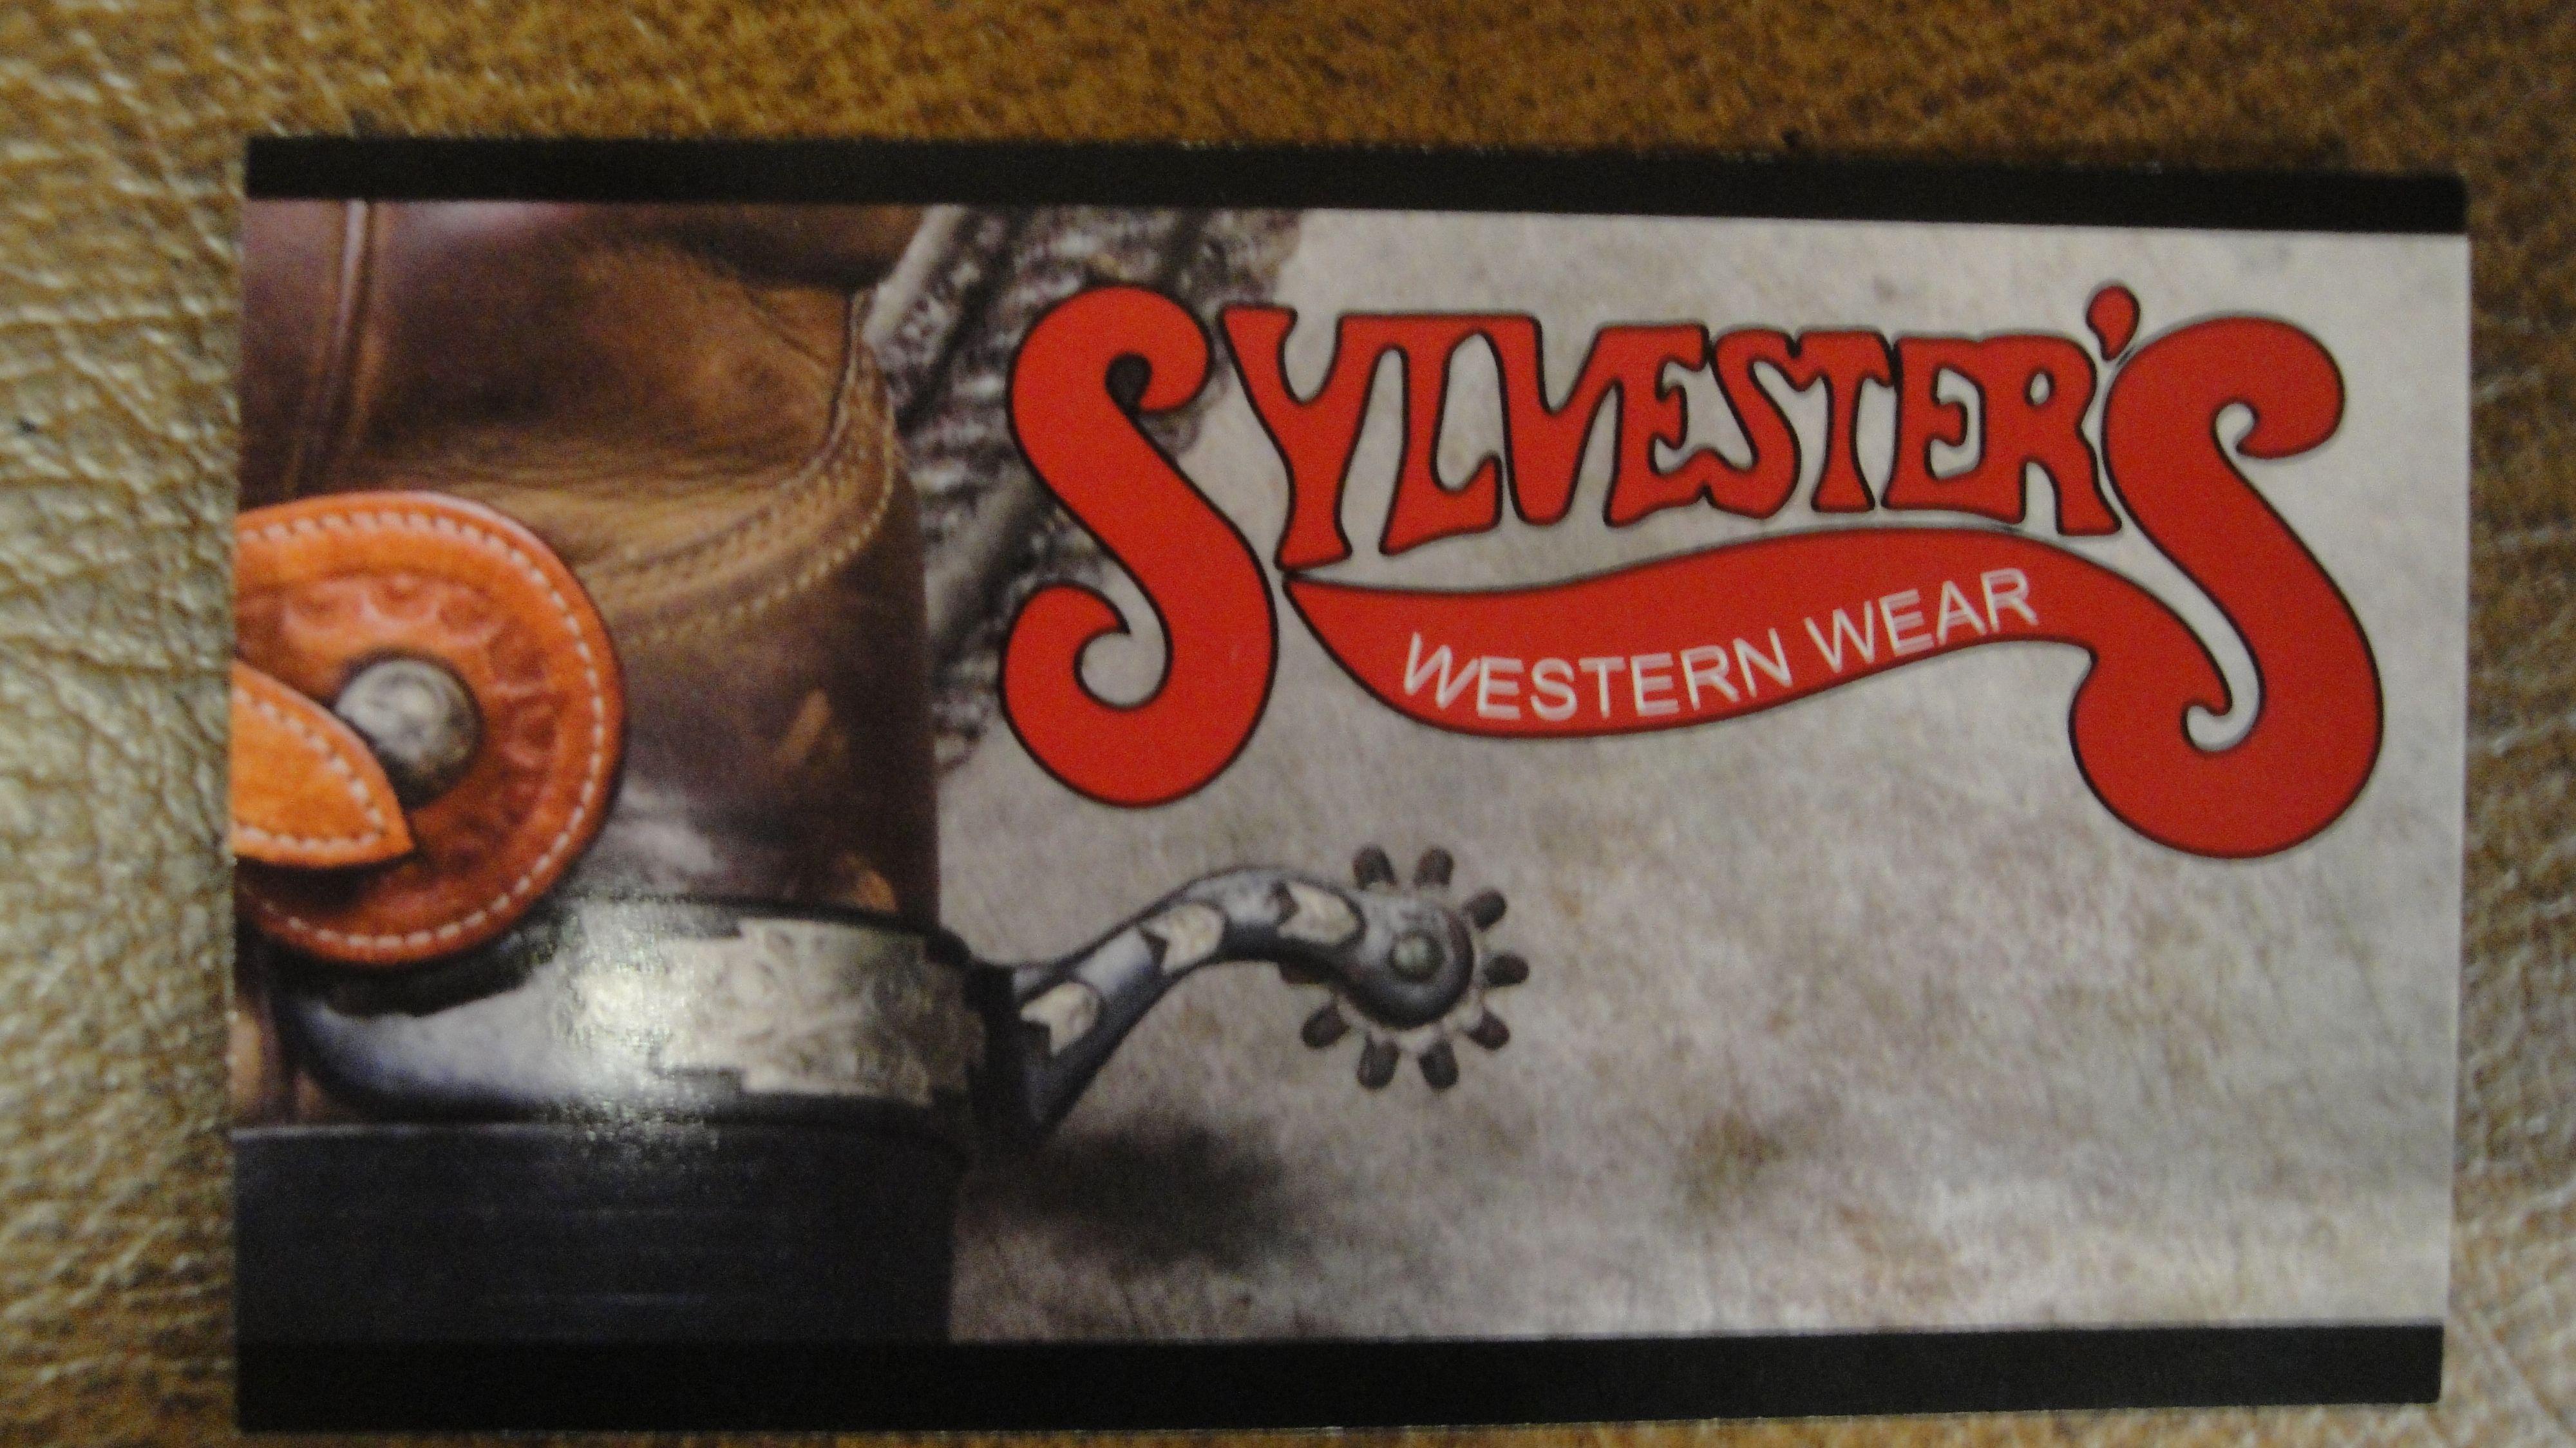 Western Clothing and Apparel Logo - Sylvester's Western Wear - Western Apparel Store - Kenner, LA 70062